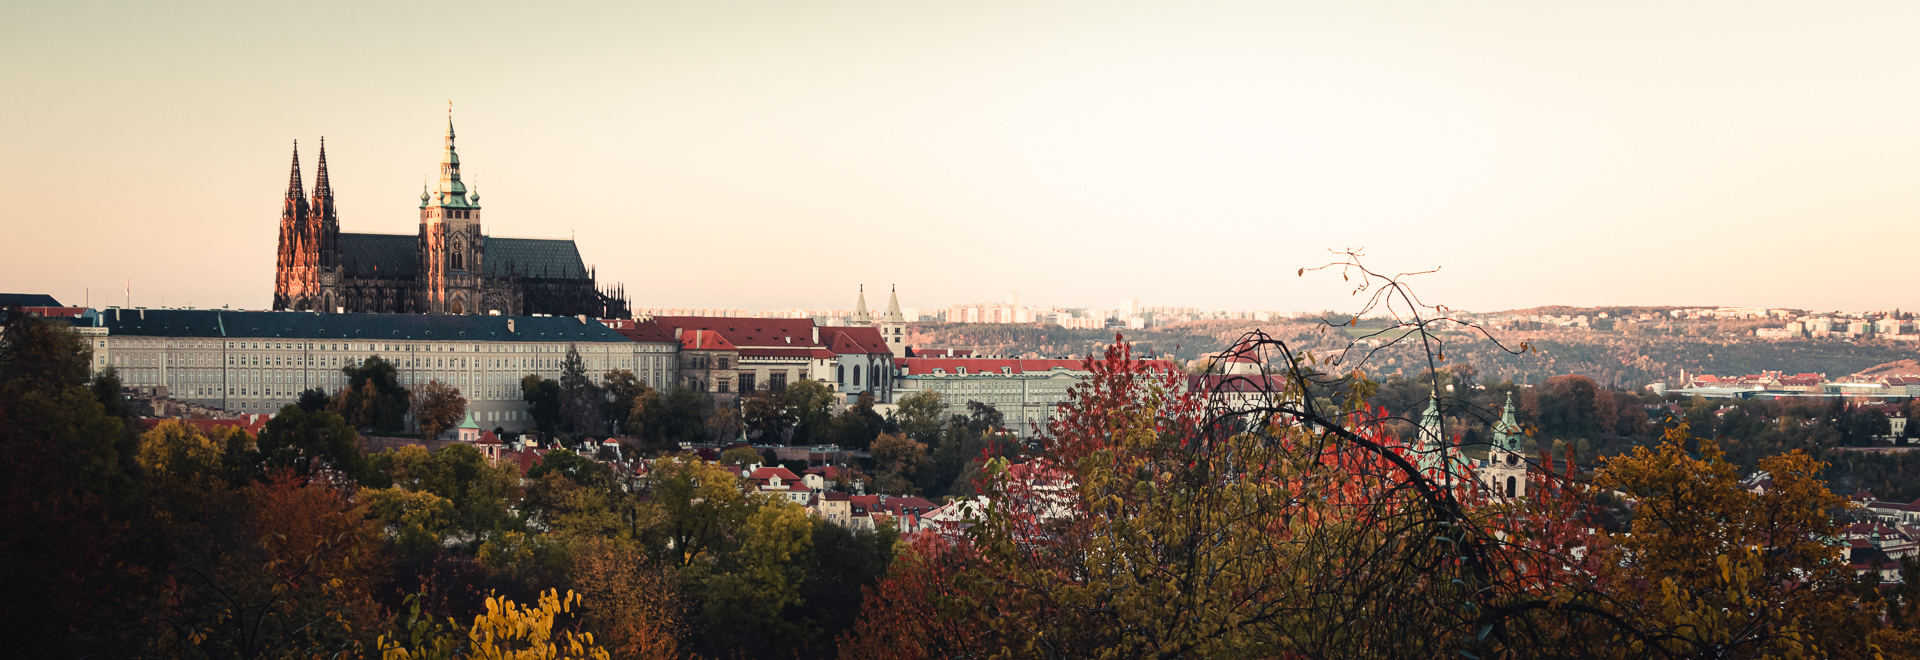 Photo of a Prague Castle in sunset taken from Petrin hill in Prague.